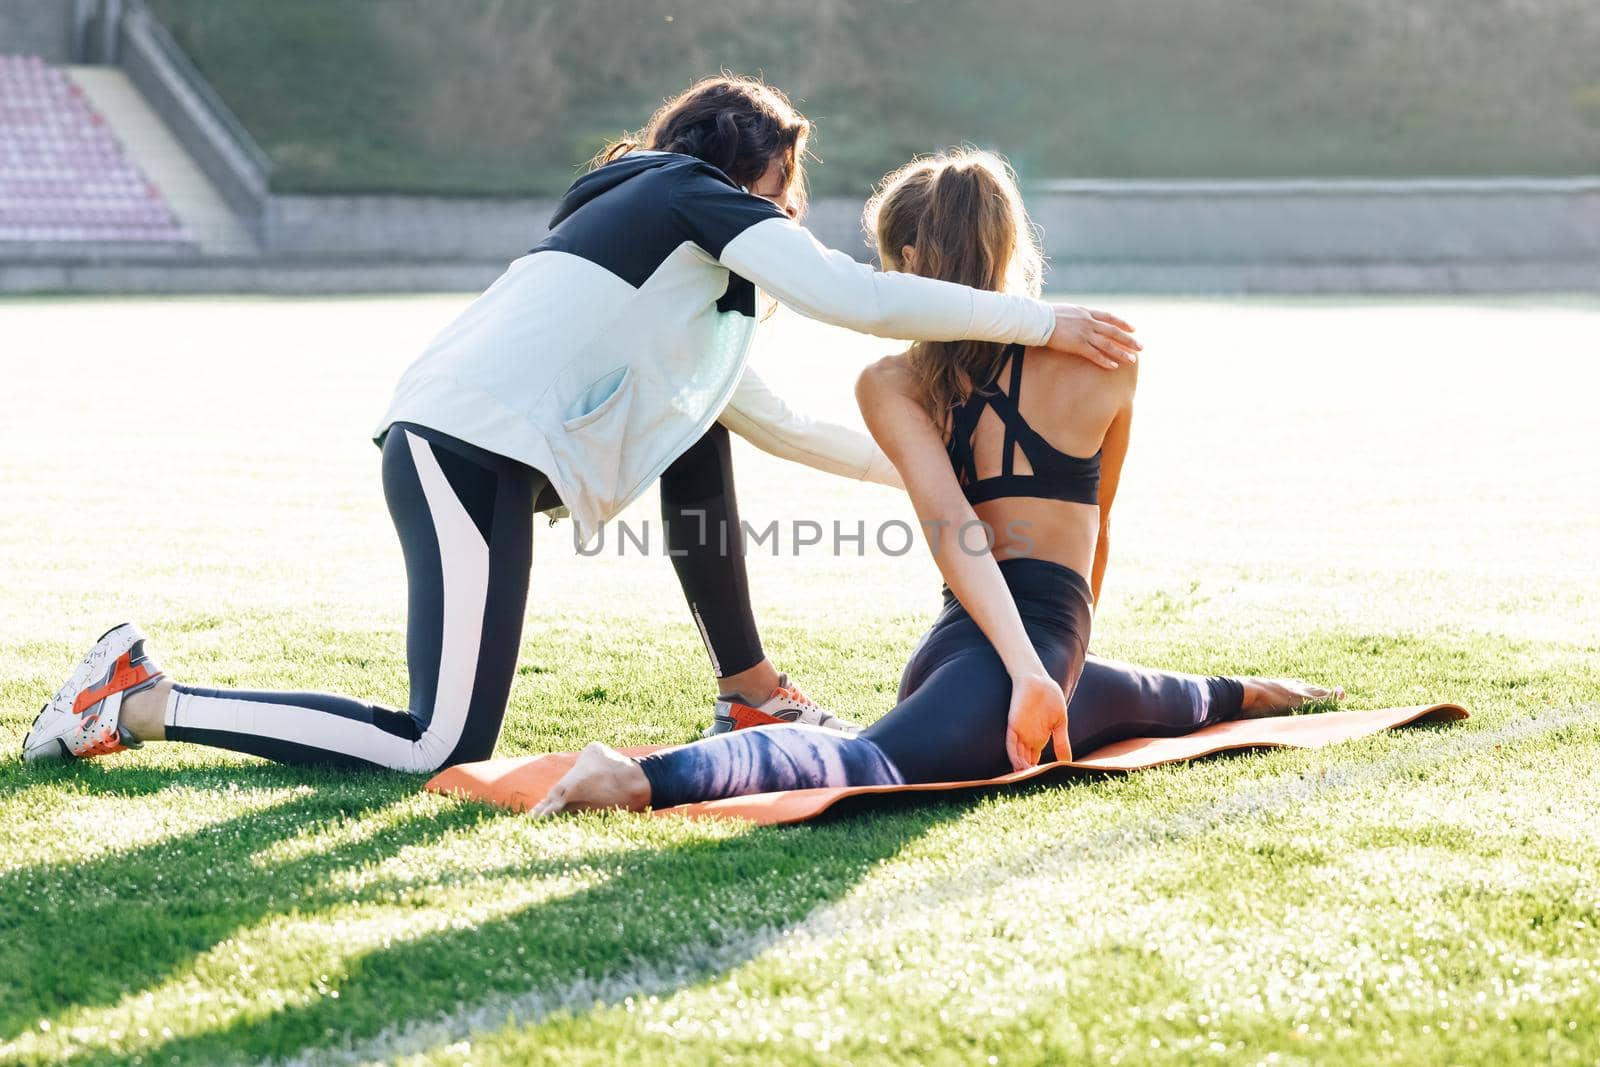 Physiotherapy and recovery. Rehabilitation concept. Physiotherapist expert checking of sportswoman physical treatment for rehabilitation. The doctor works on specific muscle groups or joints.